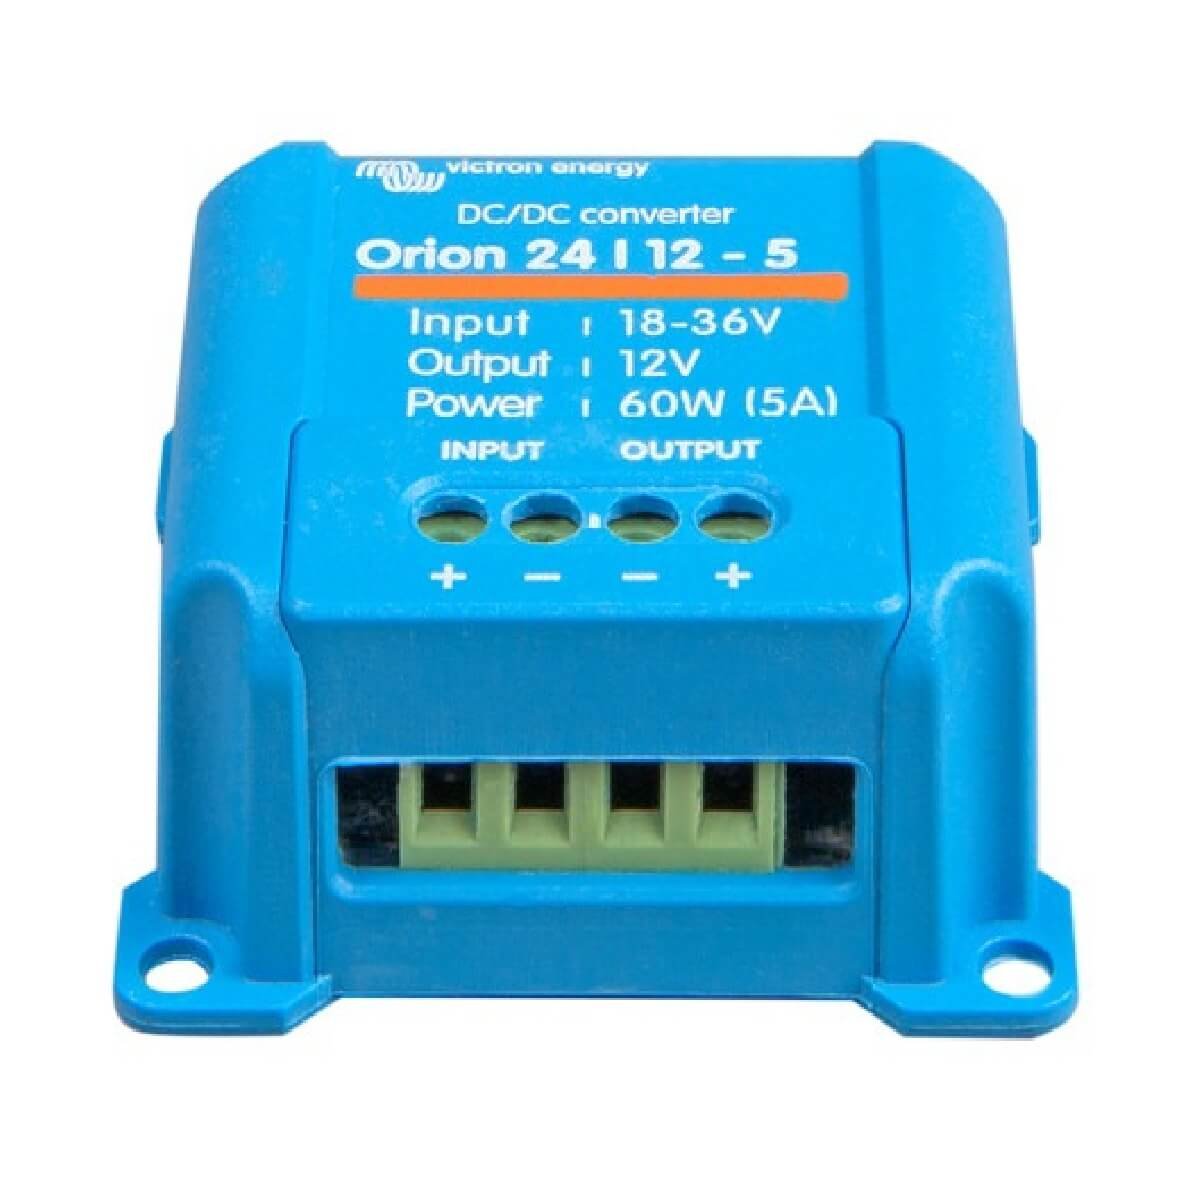 Victron Orion-Tr 24/12-5 DC-DC Converter - 24V to 12V 5A Non-isolated Converter with 18-36V input, 12V output, 60W power (5A), and multiple connection ports.